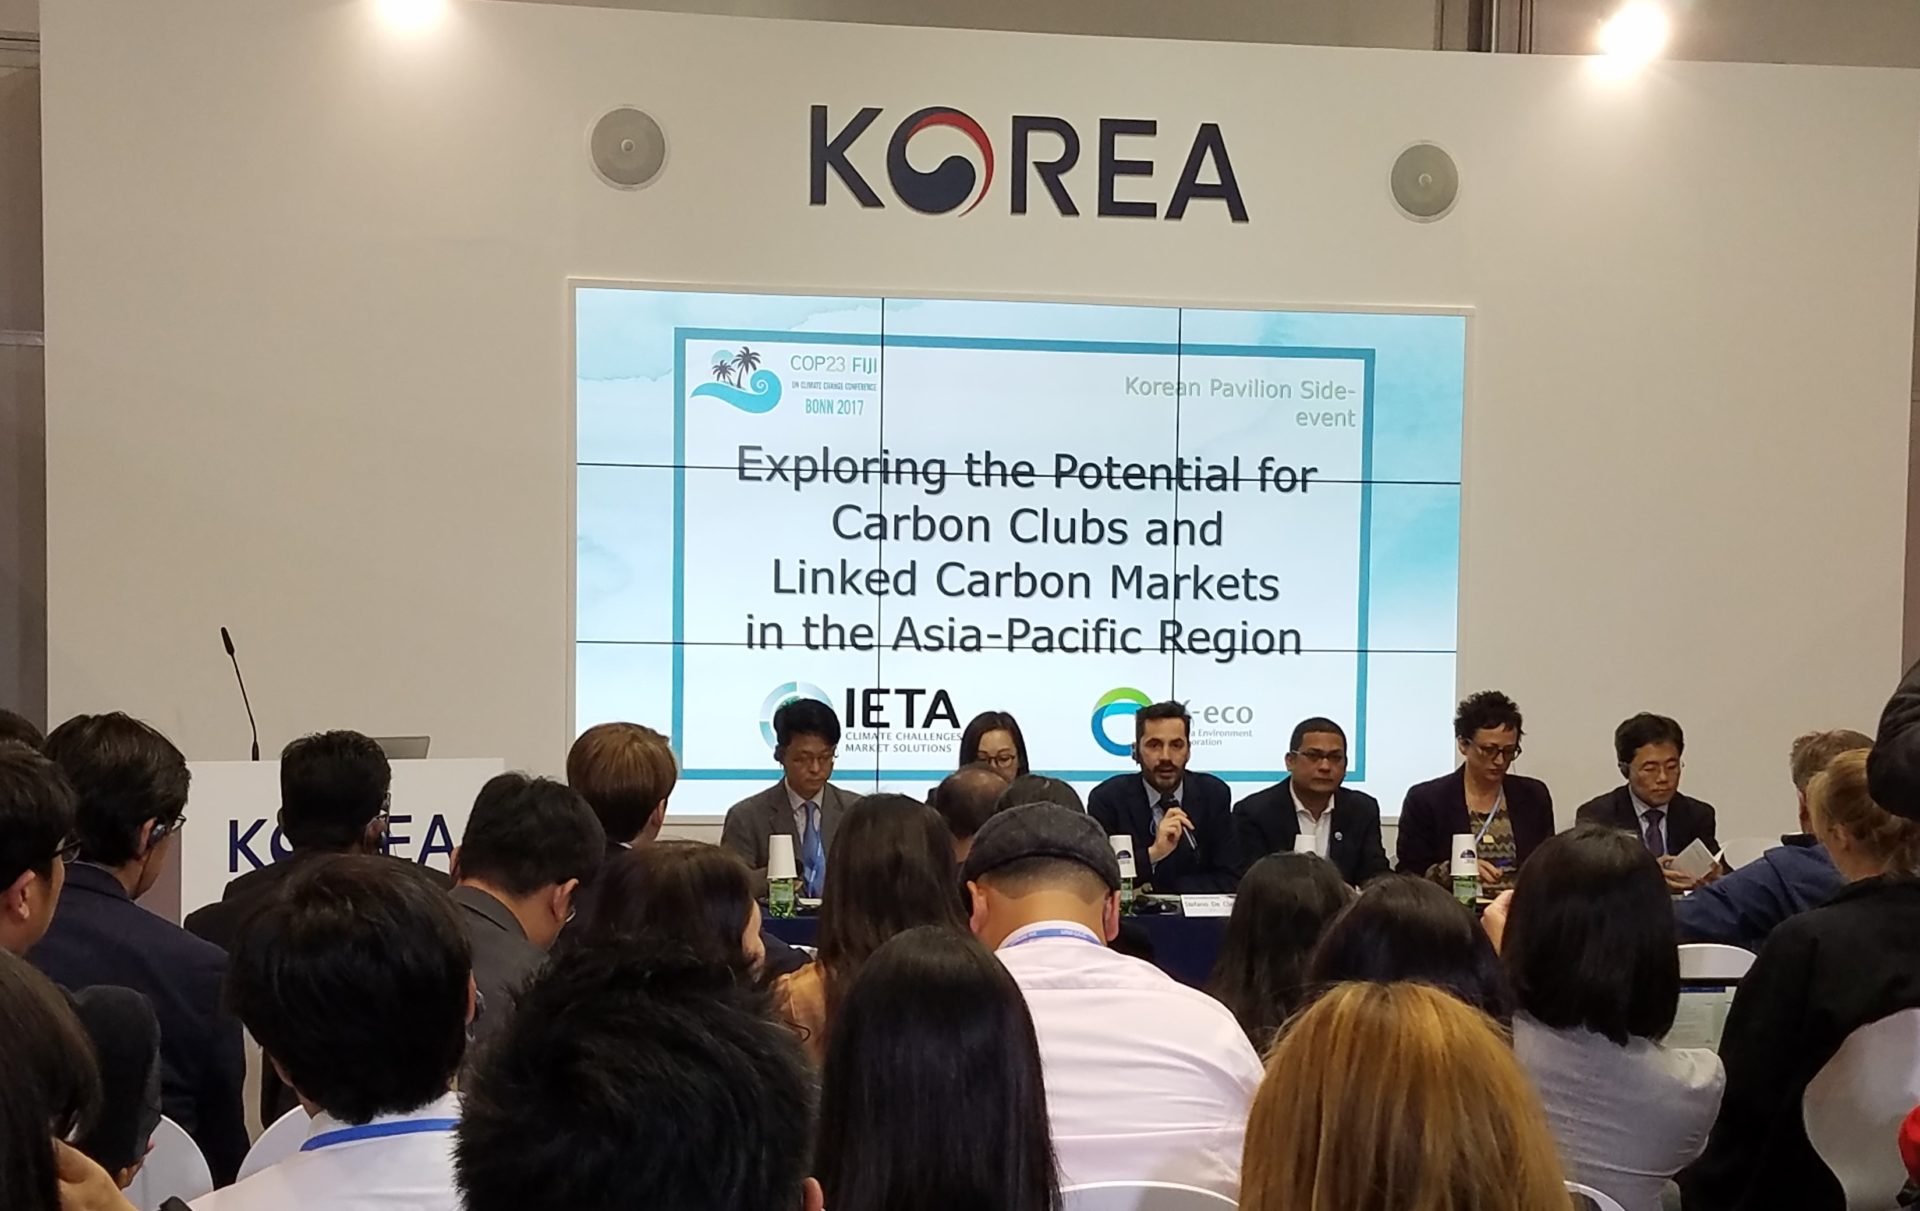 more discussion of carbon markets in Asia